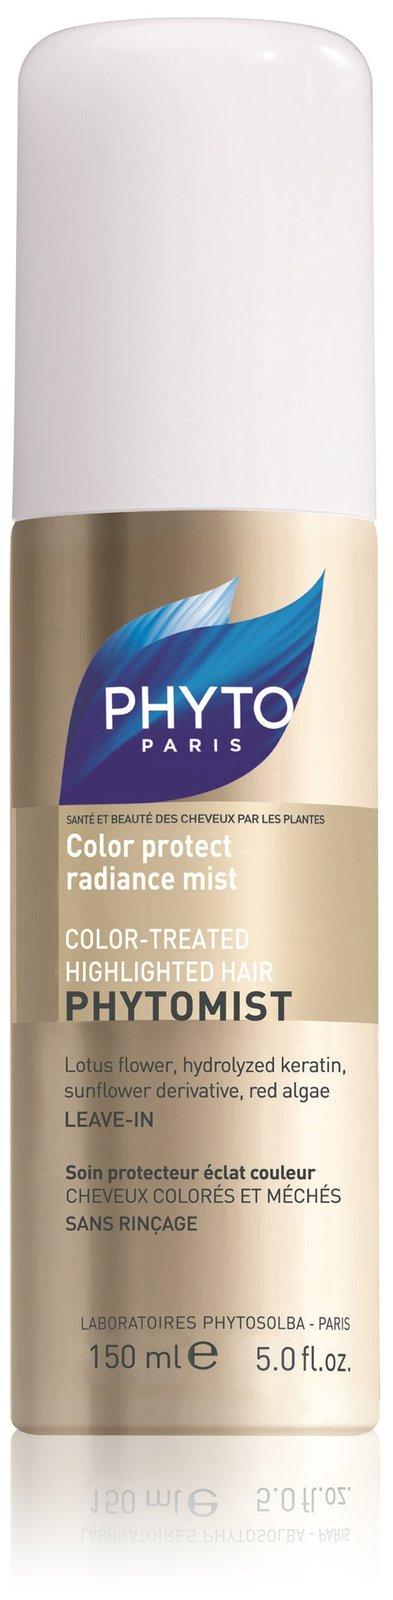 Phyto Phytomist Radiance Leave-in Conditioner